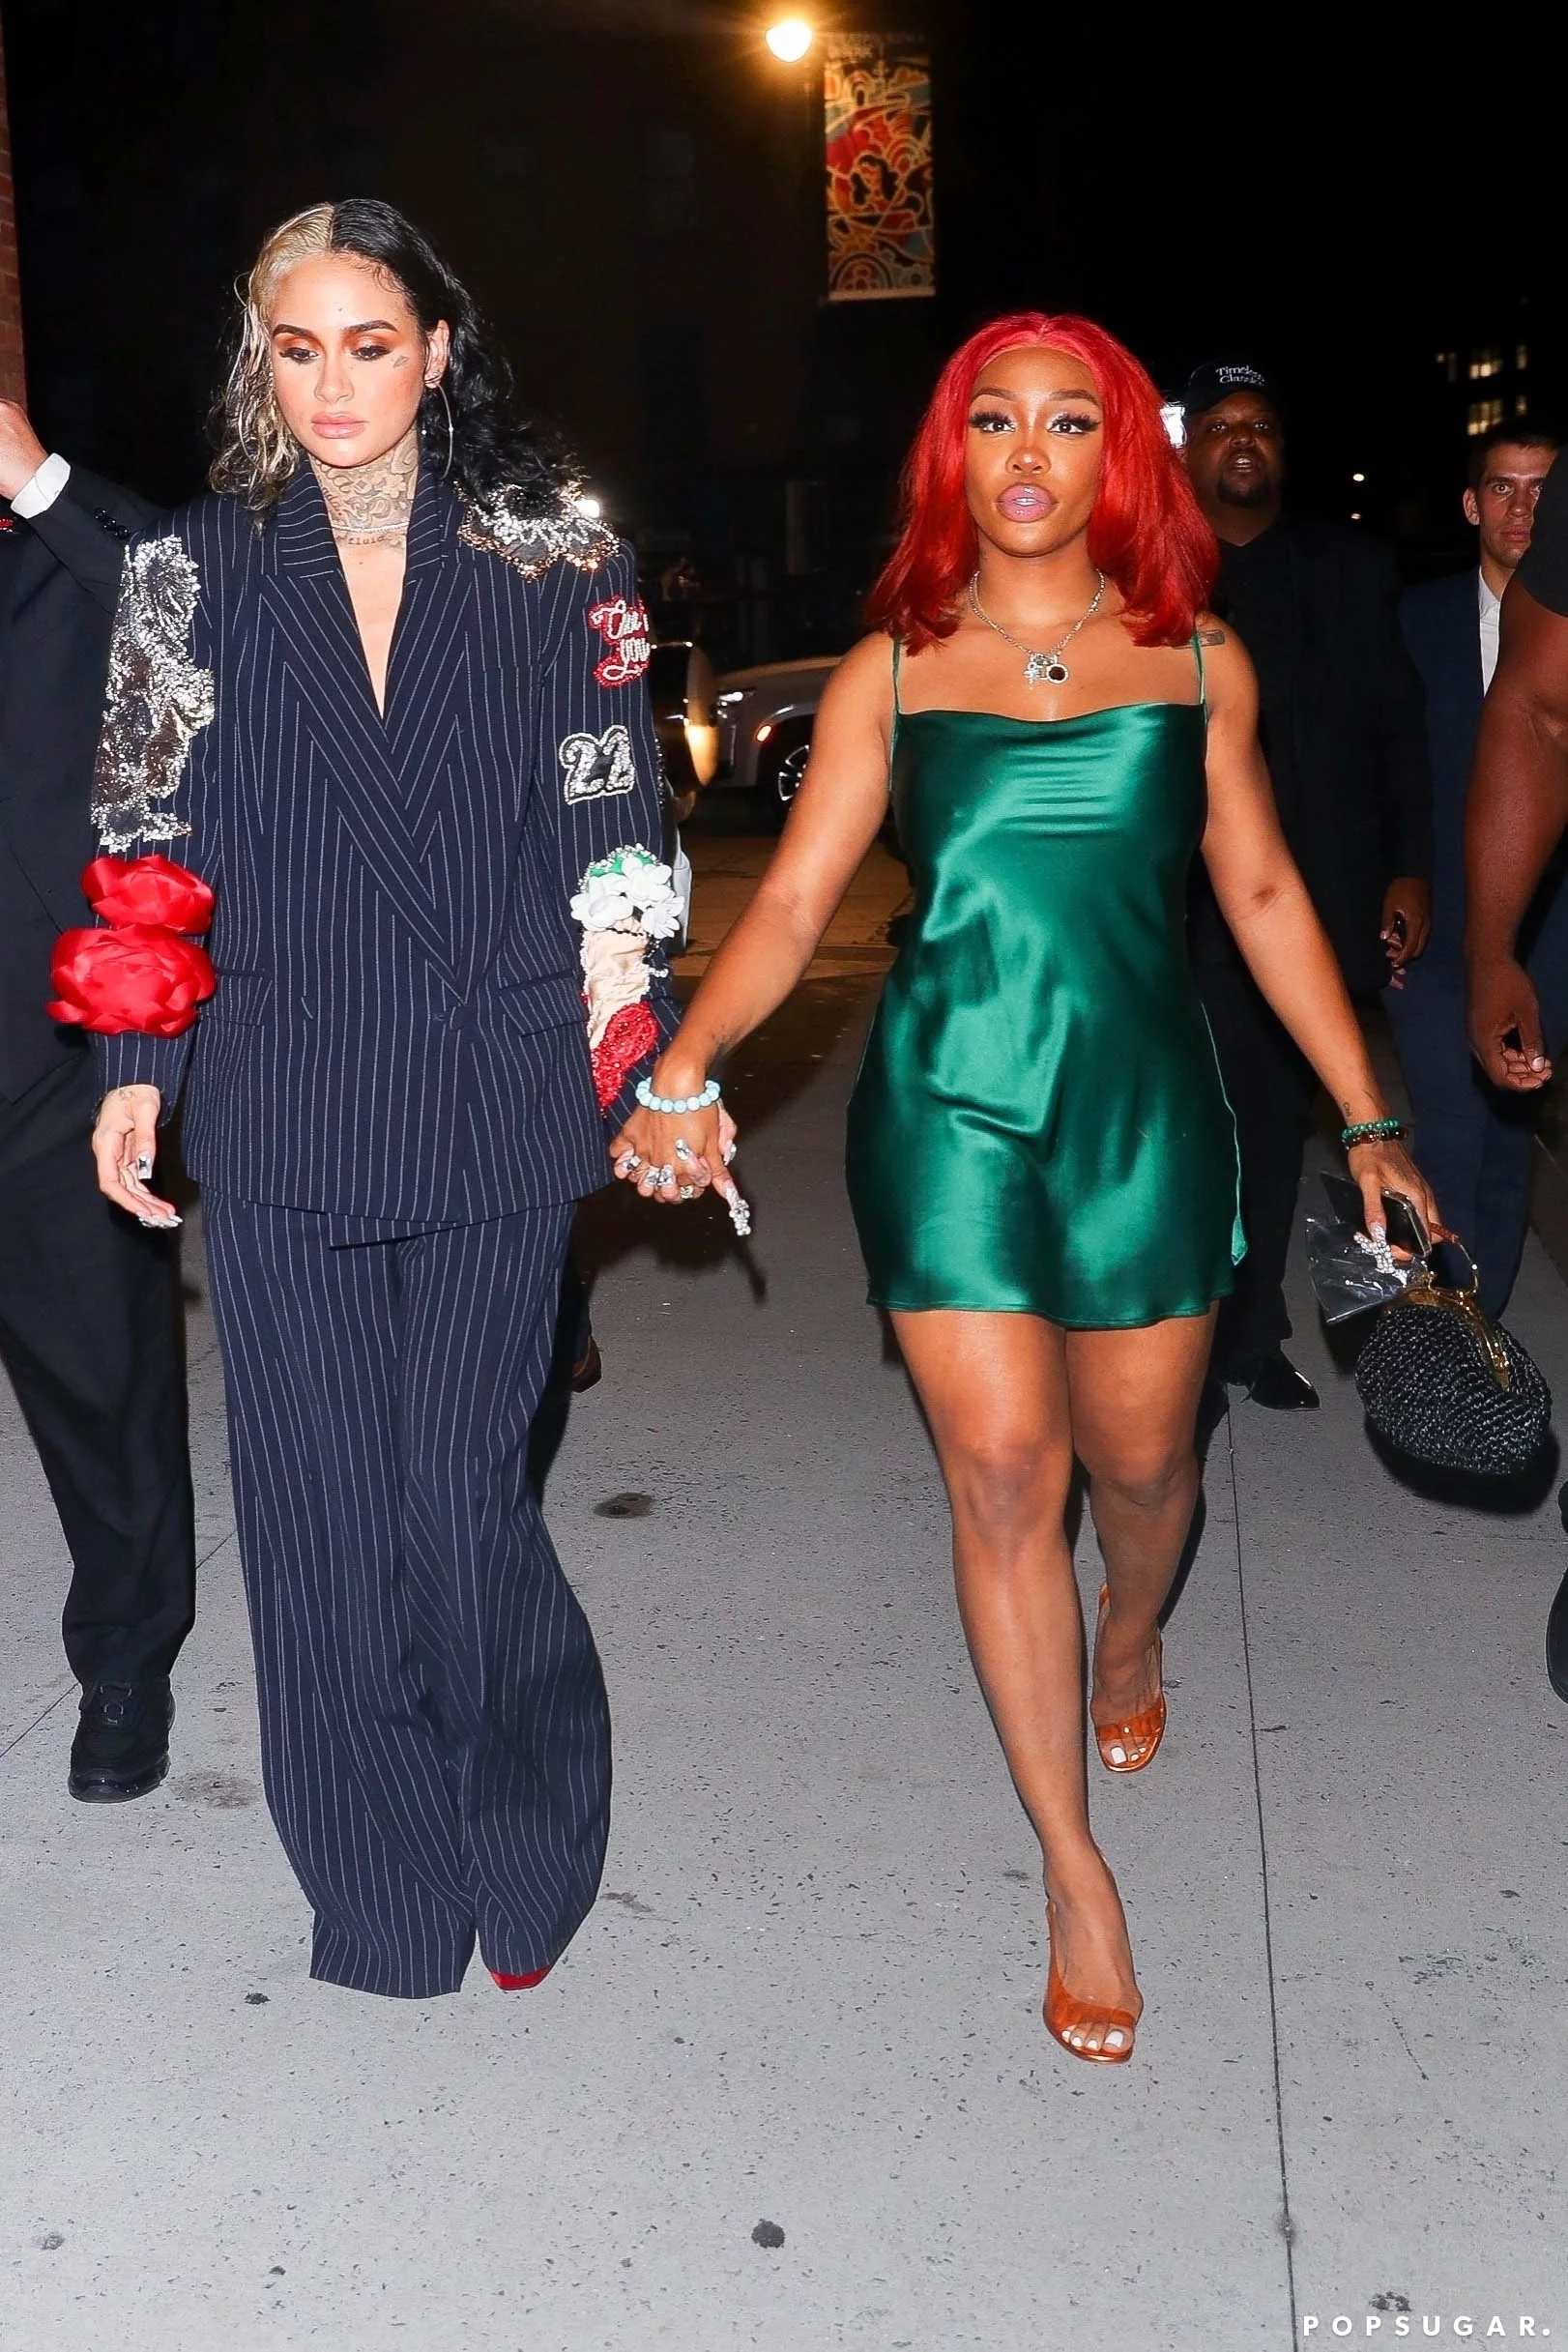 SZA and Kehlani holding hands in Met Gala party